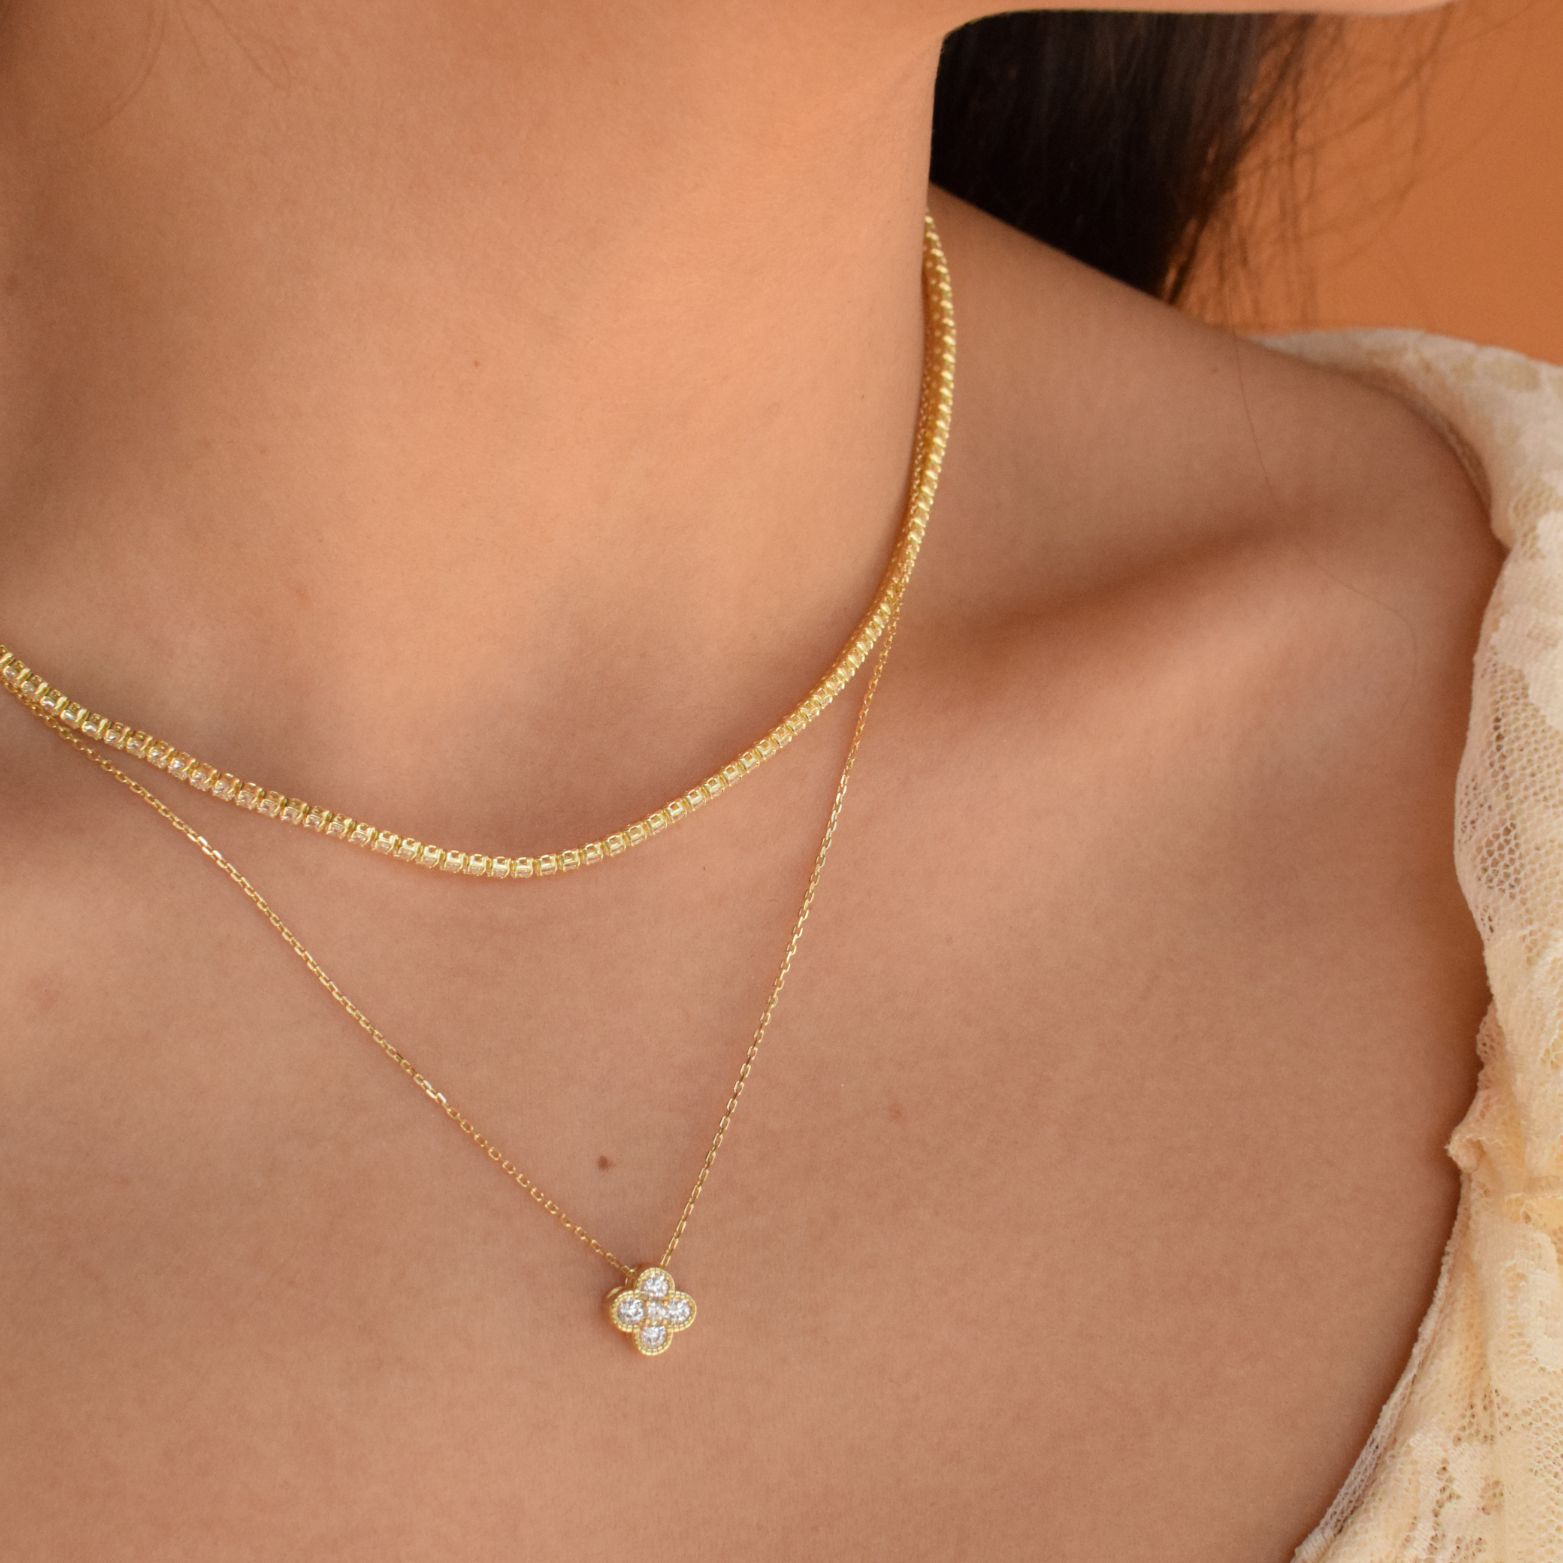 A person showcasing the Tiffany 14K gold-plated necklace with a pendant